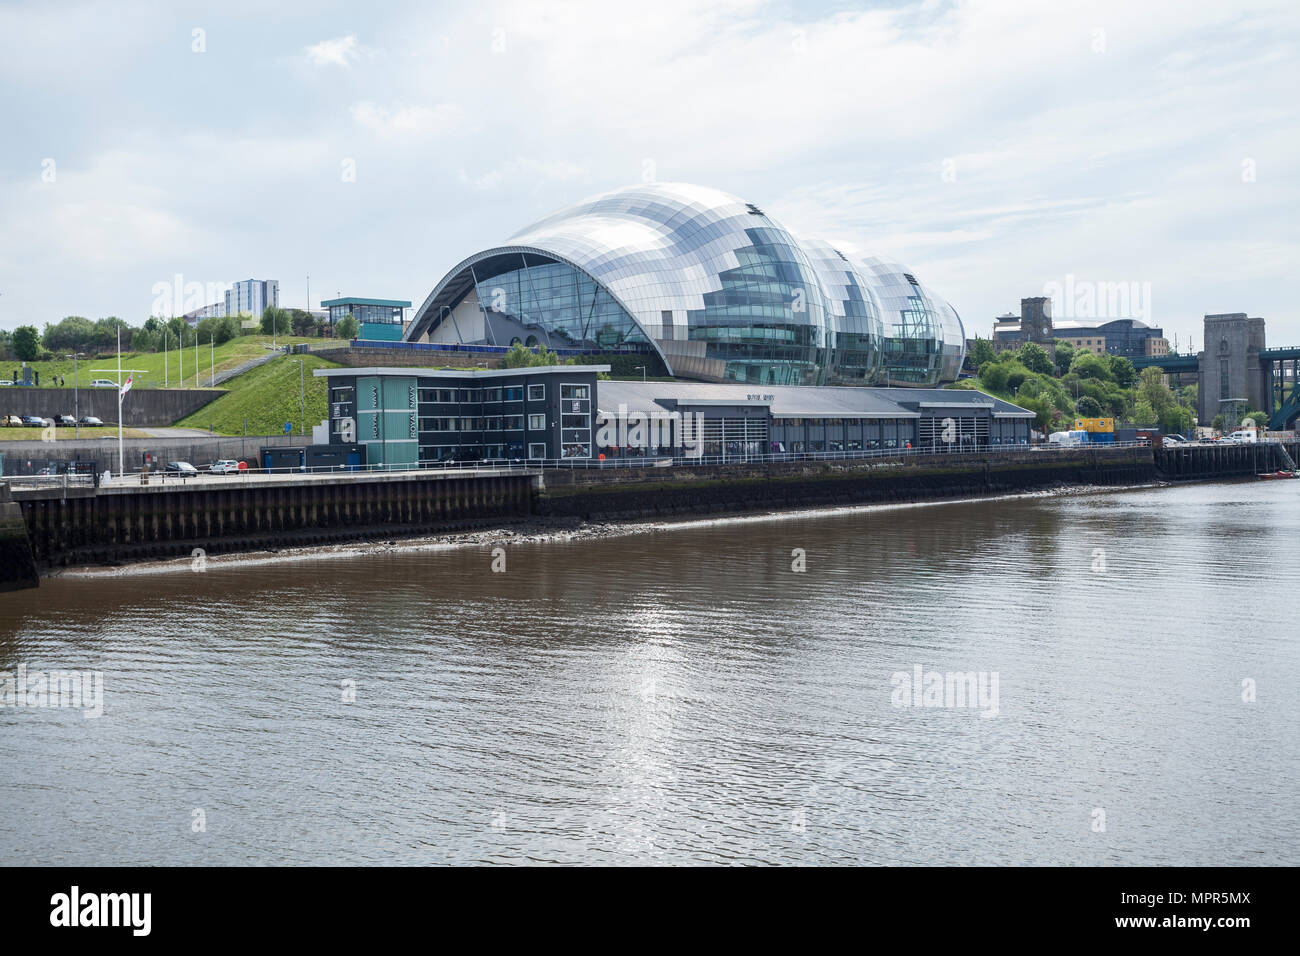 The Sage building at the Quayside,Gateshead and Newcastle,England,UK Stock Photo